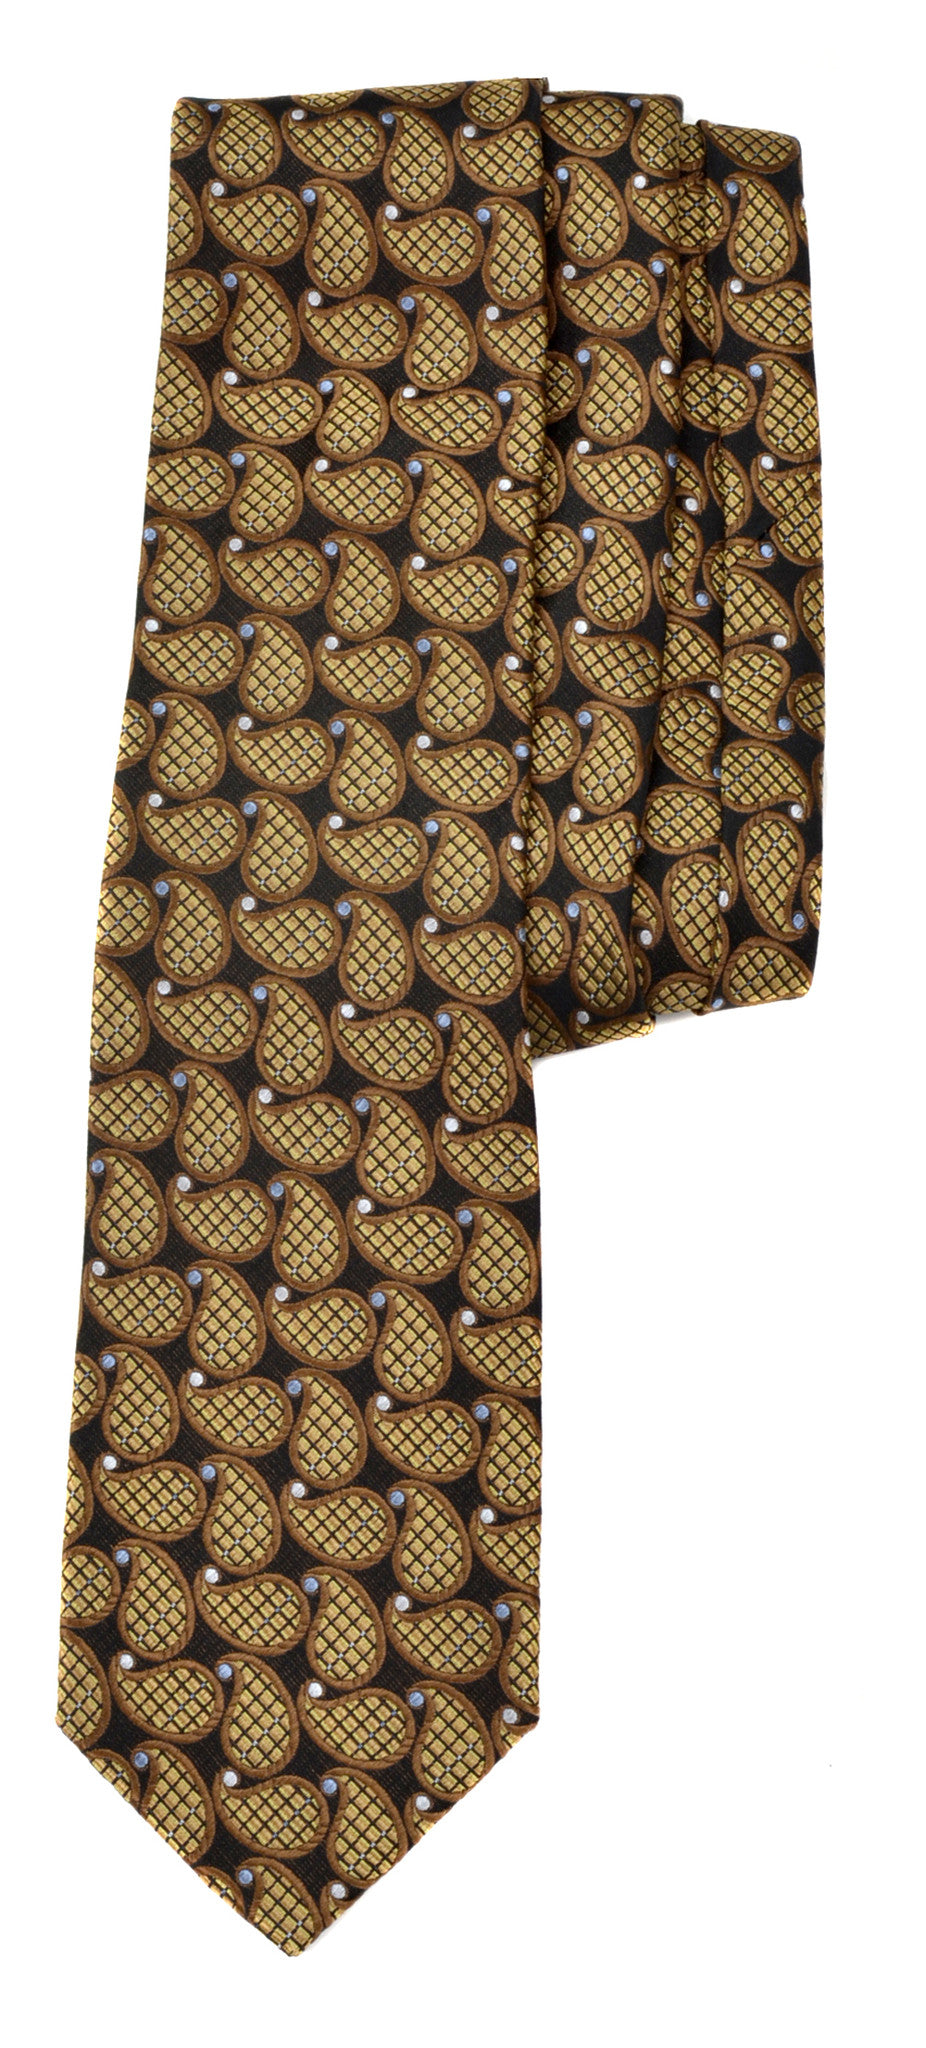 Pacific Silk Neck Ties - Andy Thornal Company